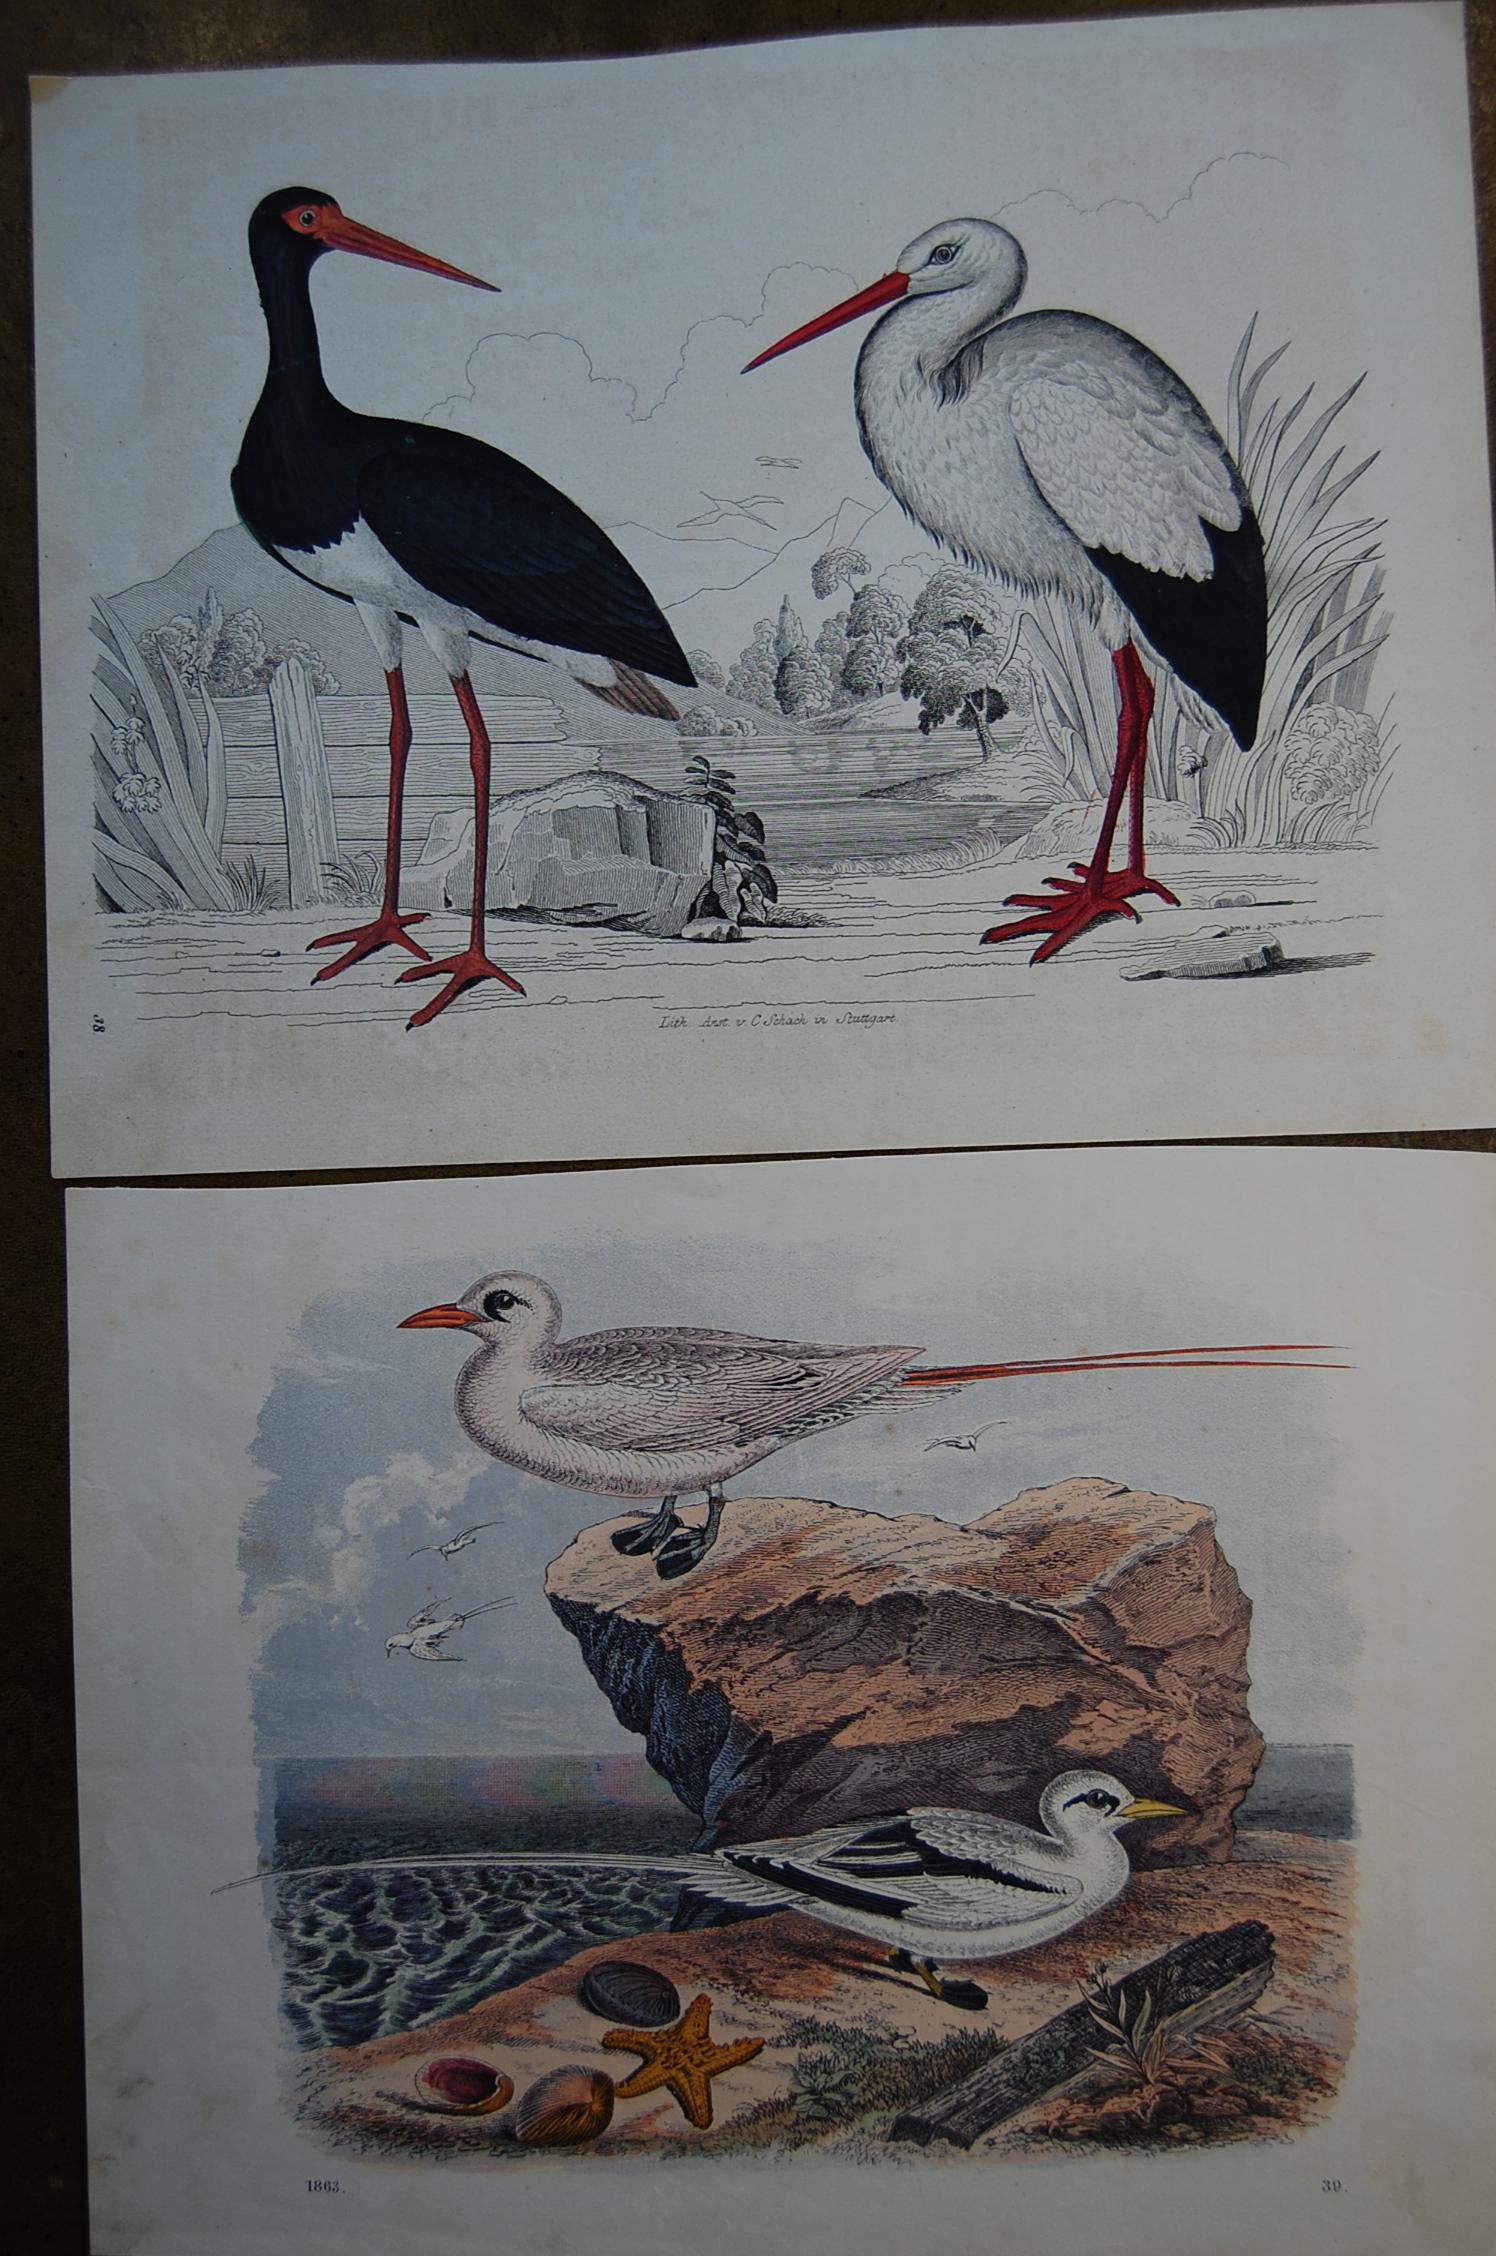 Two similar hand colored prints dated 1863, by Anst. v. C. Schach. Good overall condition and bright beautiful colors.